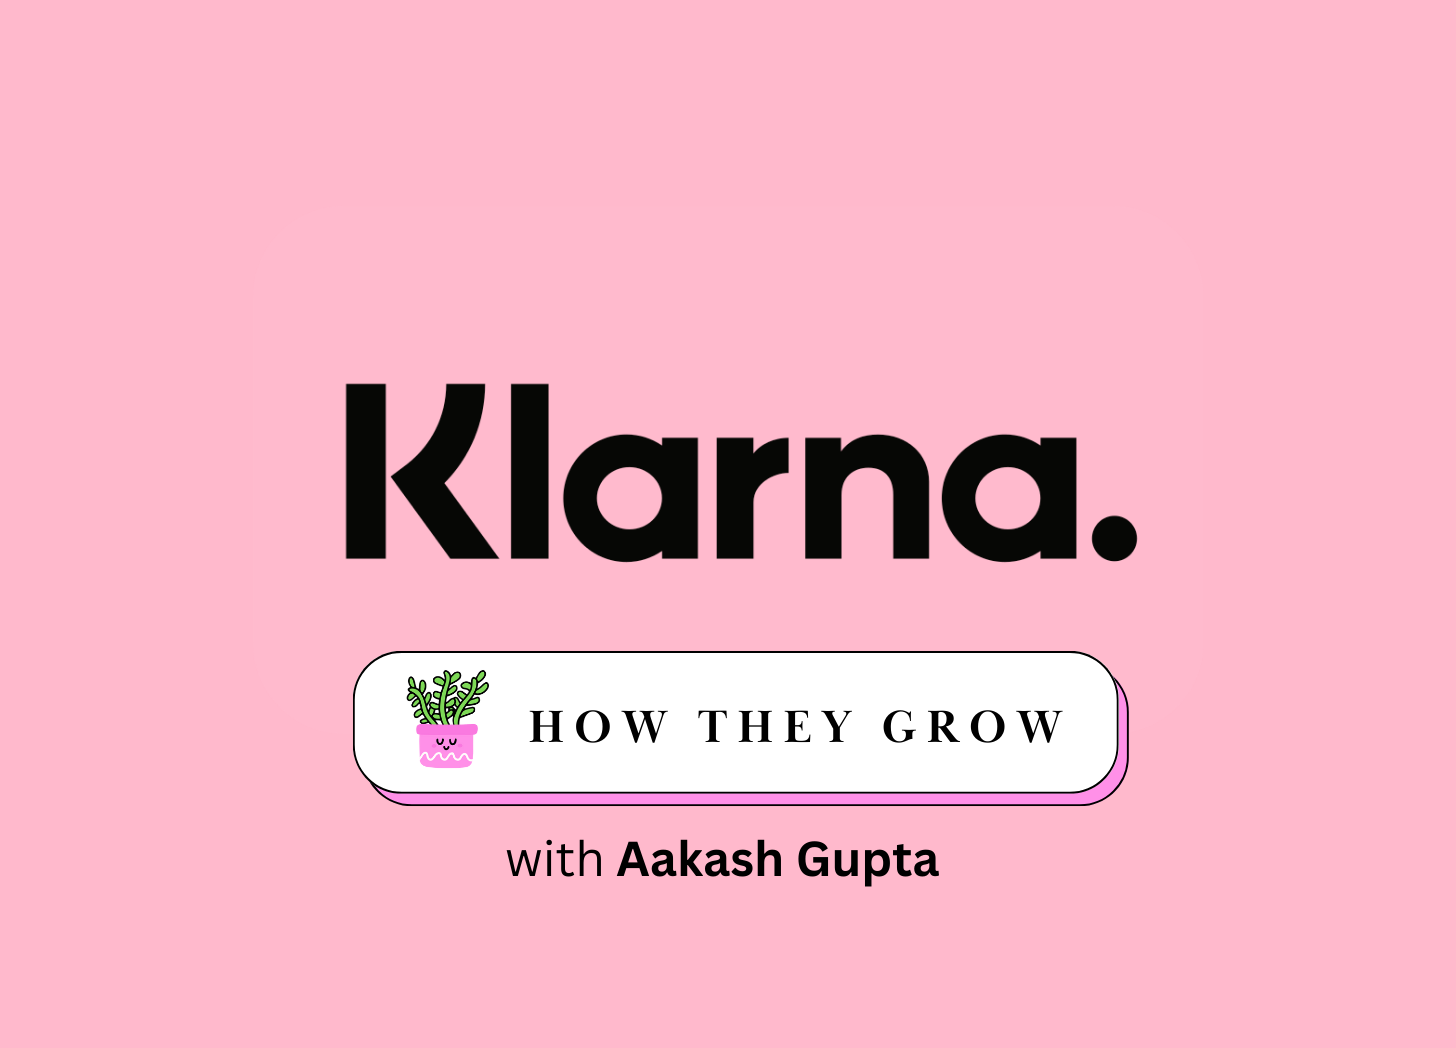 Klarna launches game-changing new shopping feature, bringing interest-free  shopping to ALL online retailers